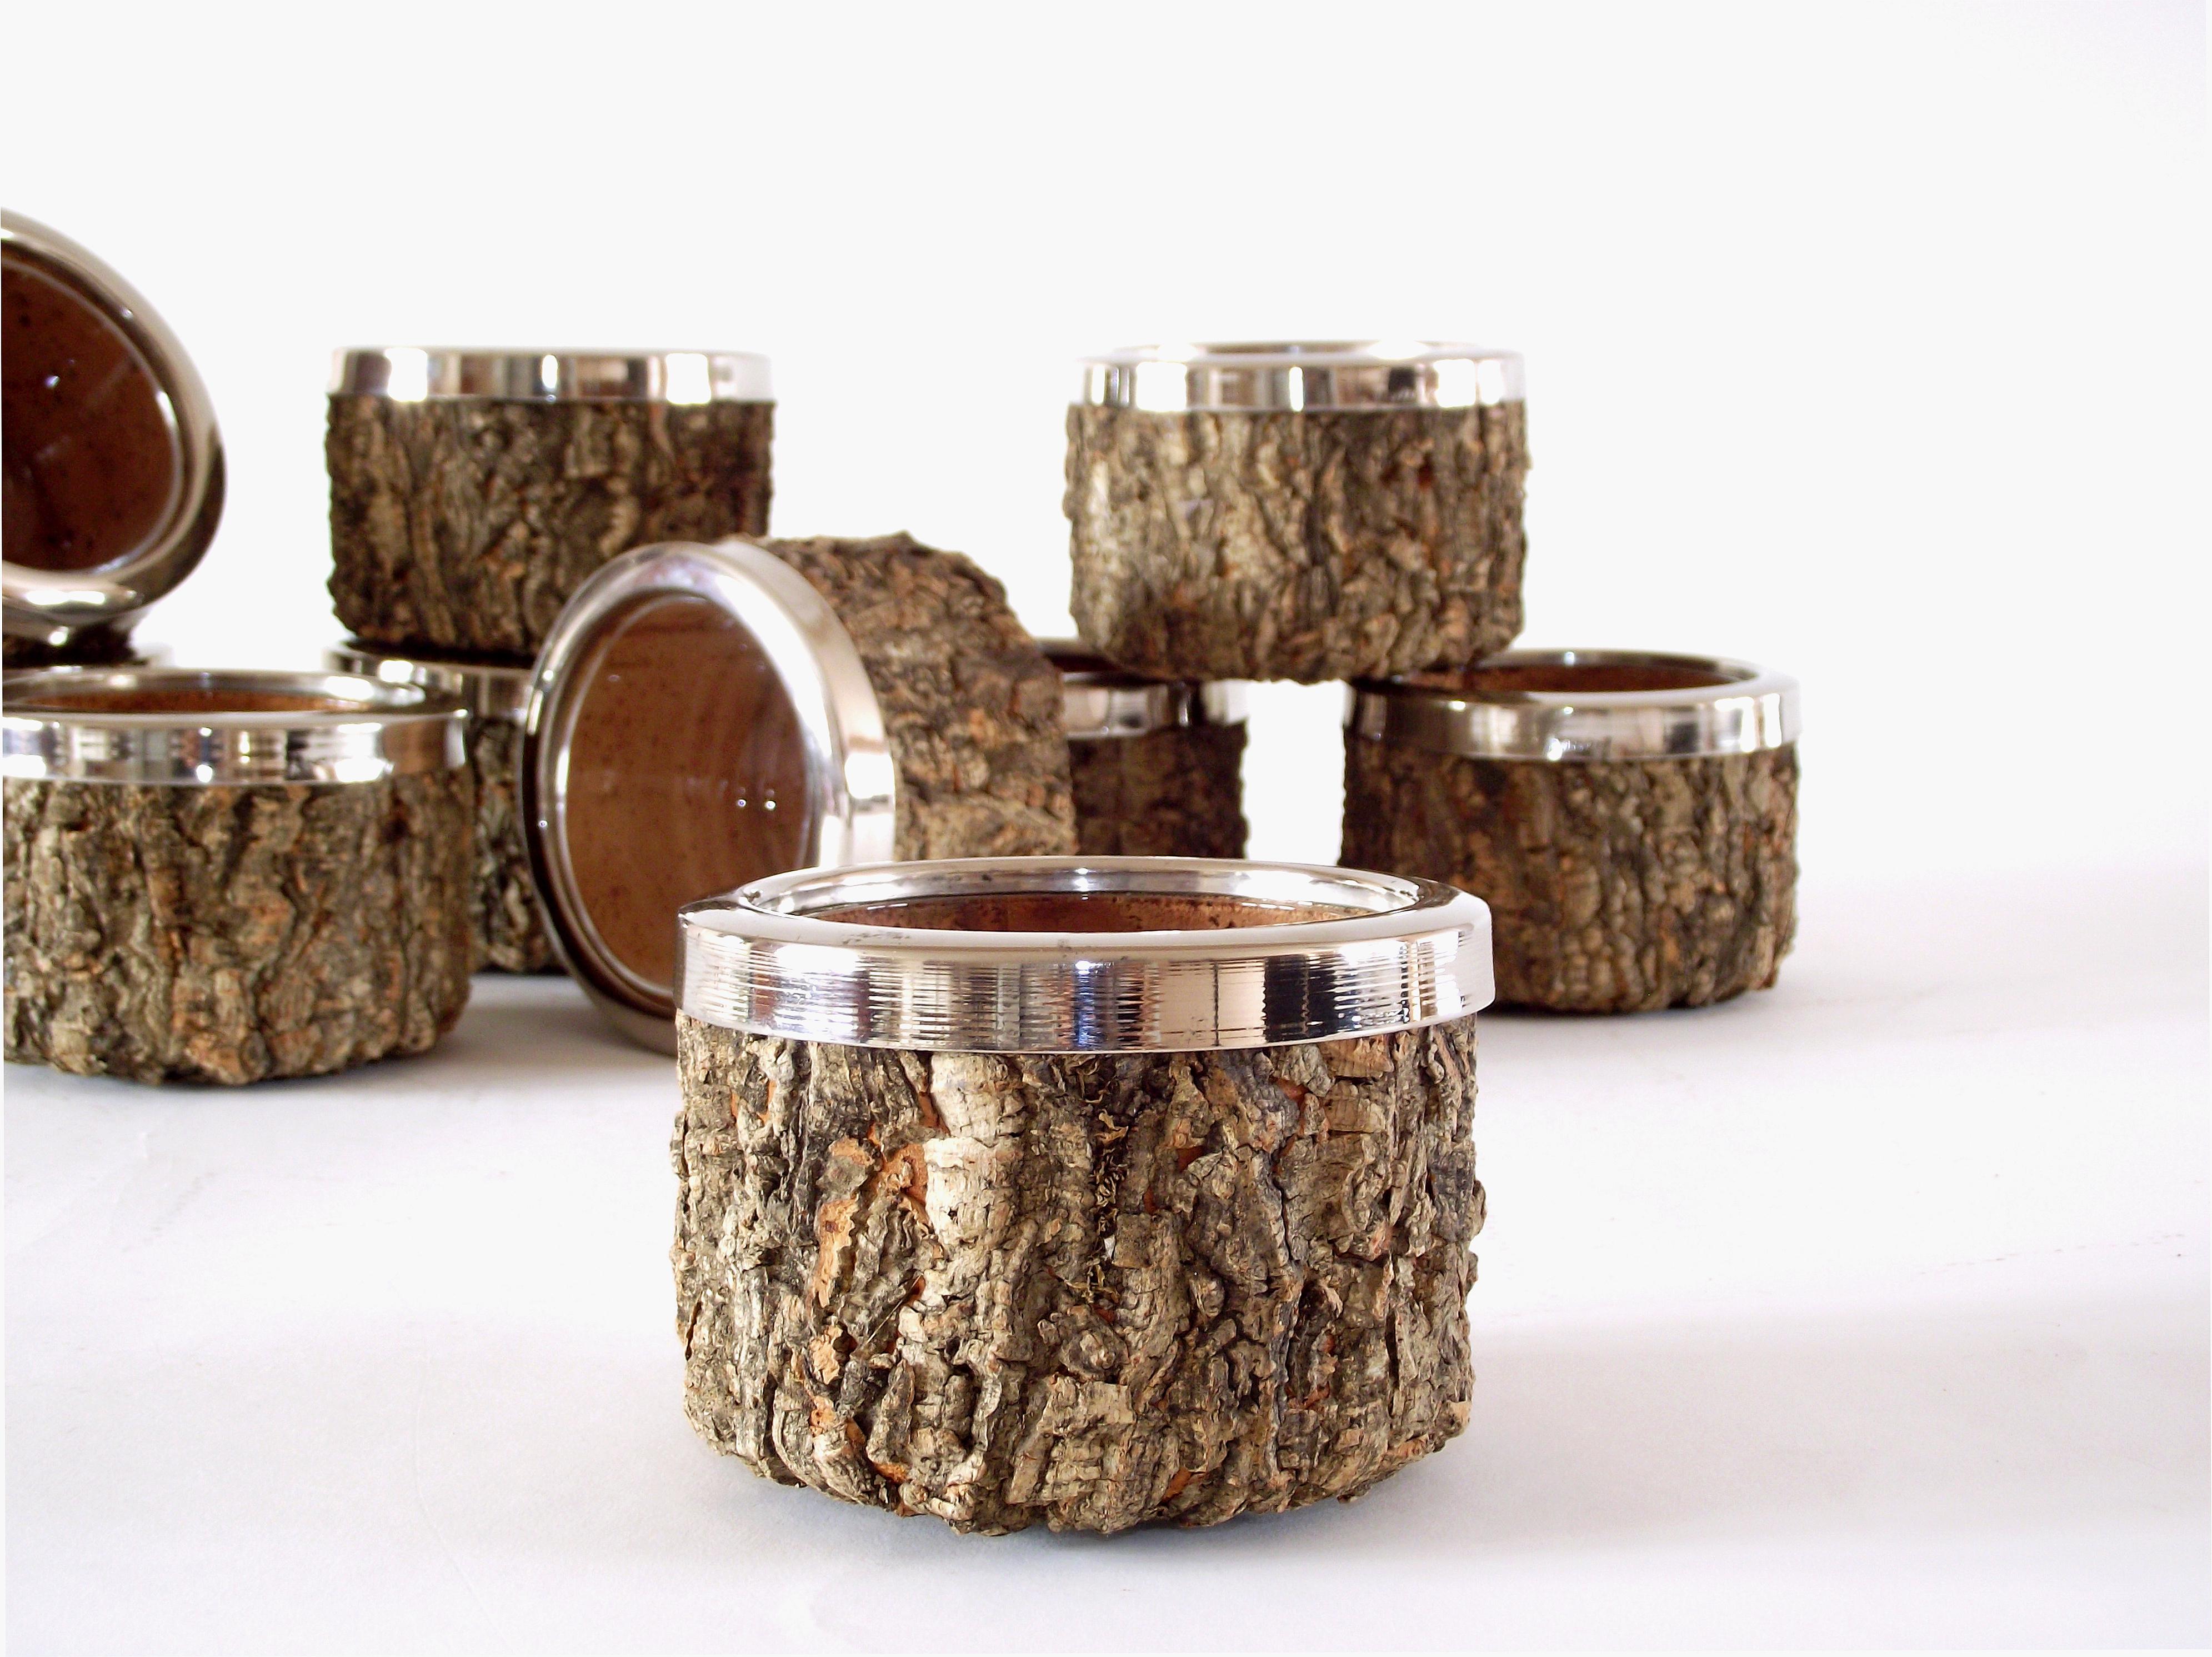 Organic Modern Gabriella Crespi Pair of Cork and Chrome Bowls with Glass Inserts, 1970s